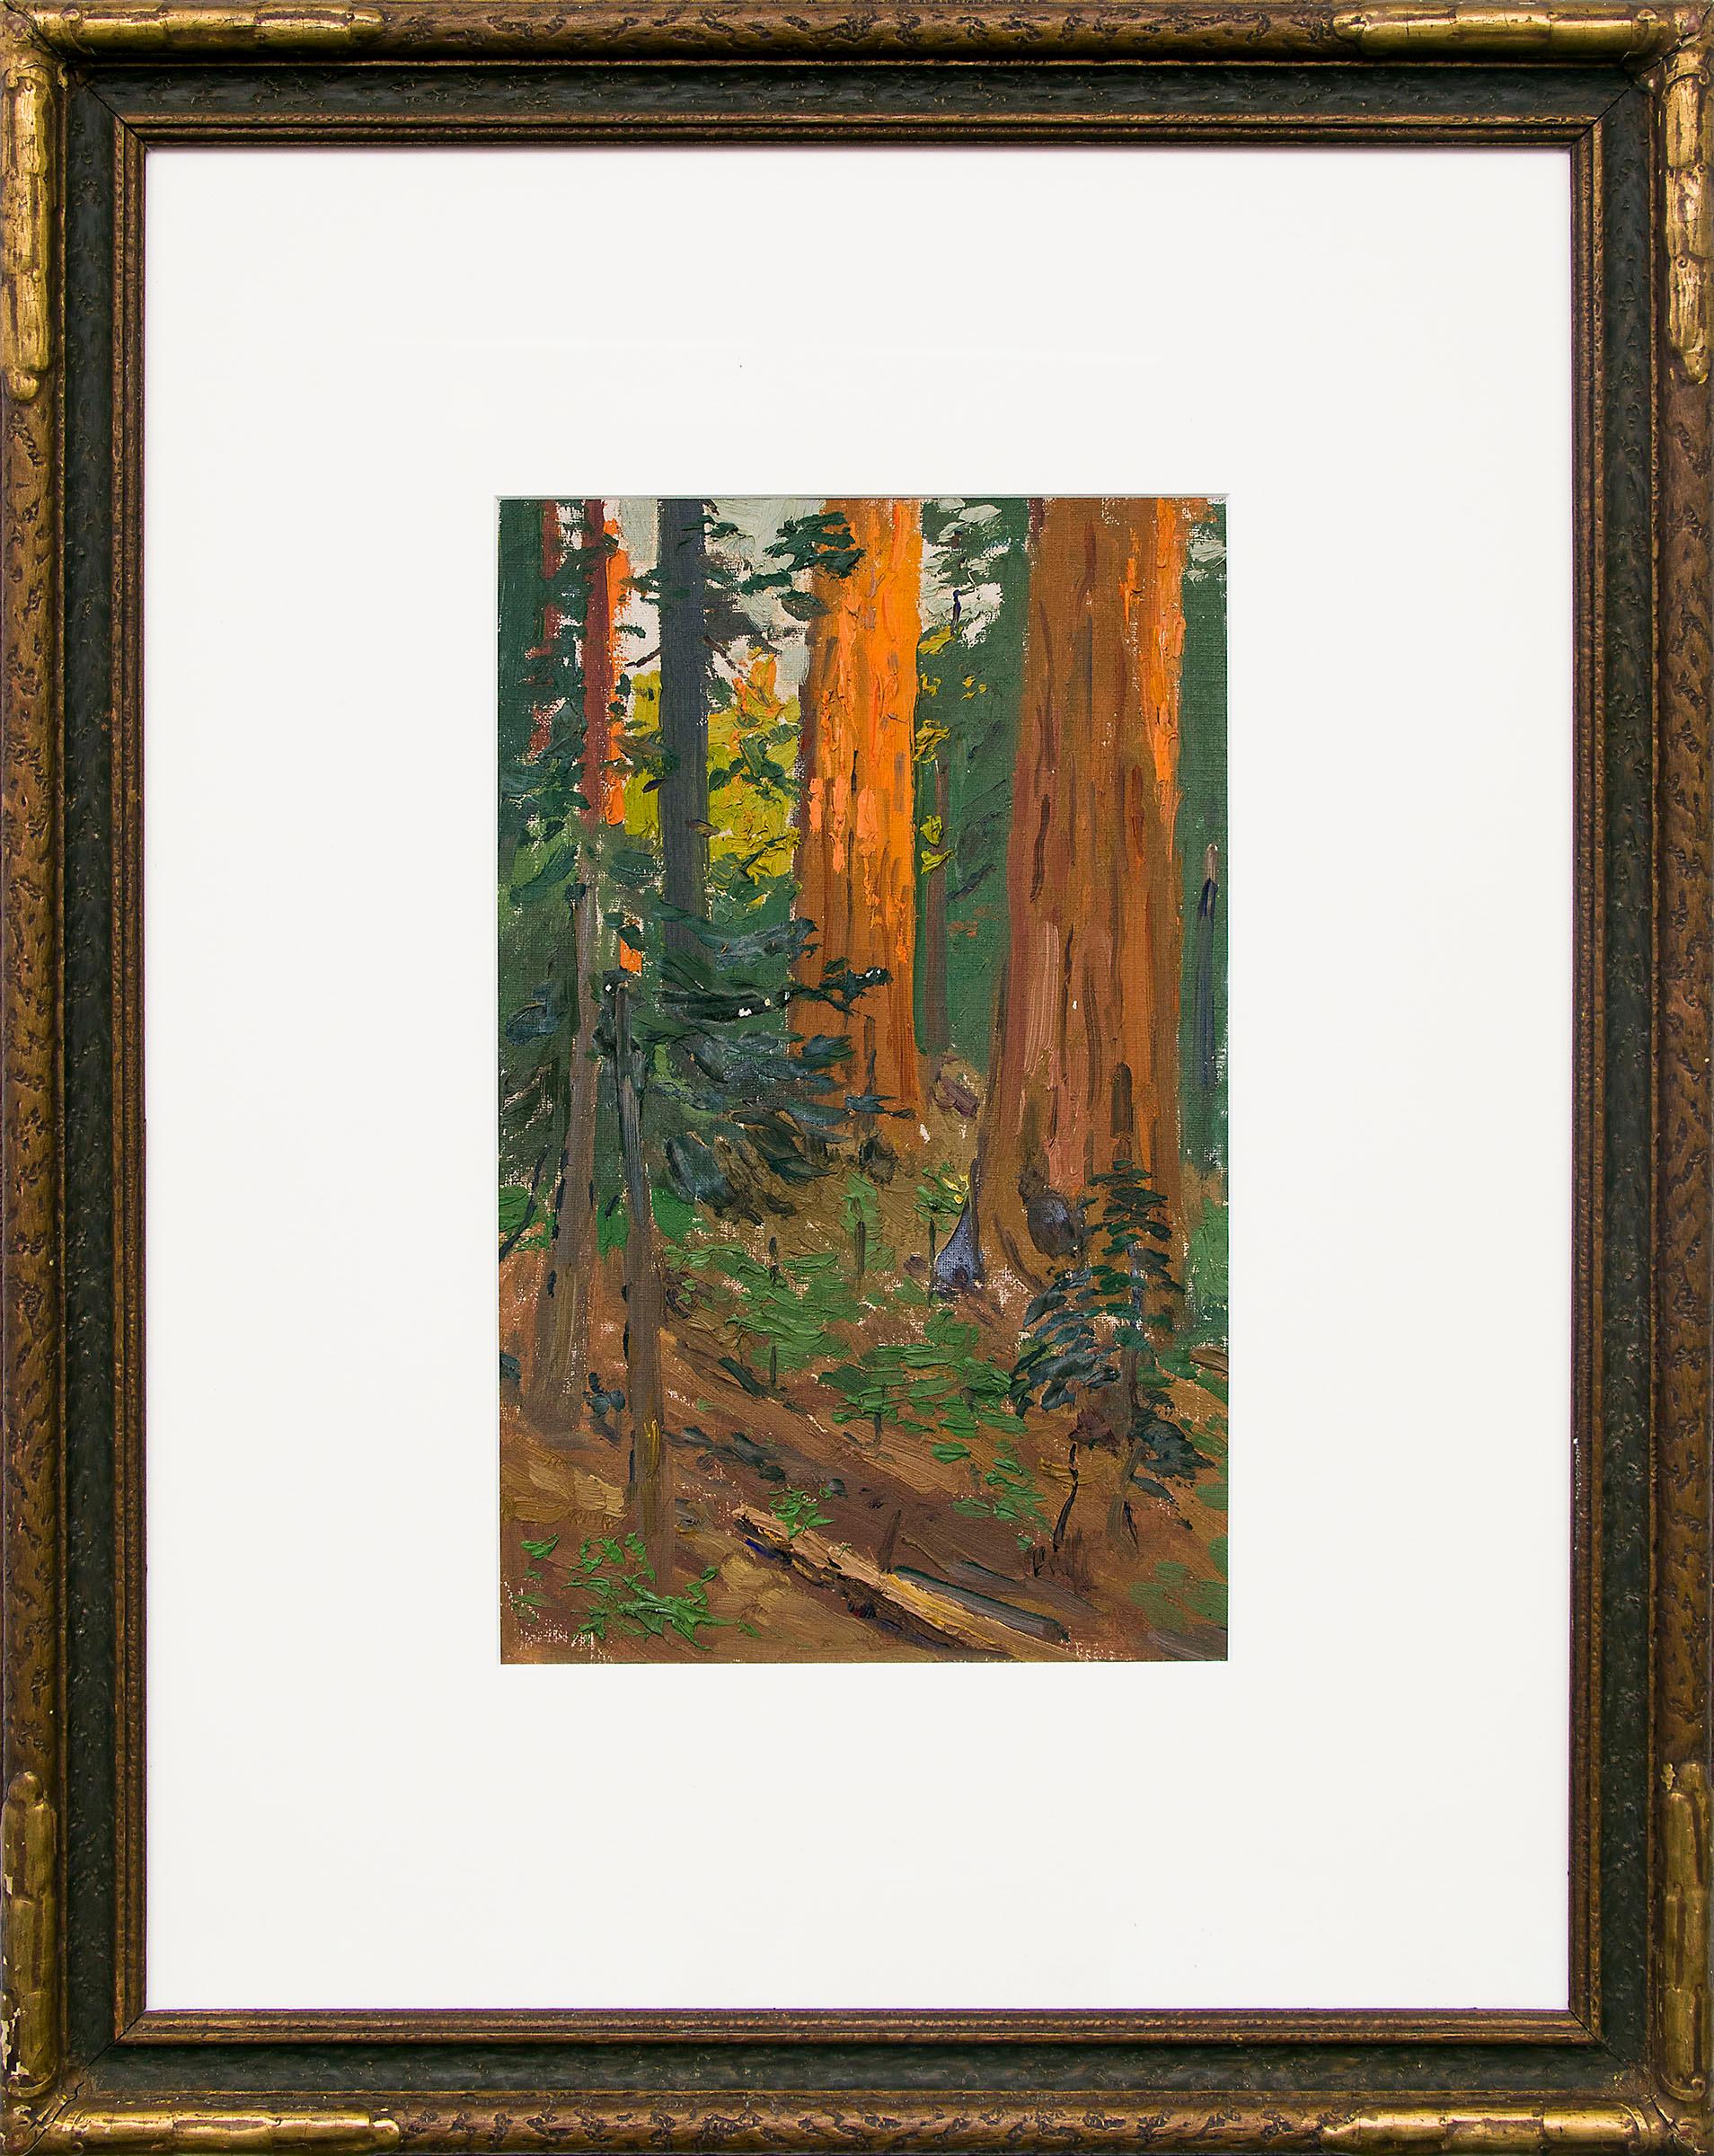 Charles Partridge Adams Landscape Painting - Interior Forest Scene with Redwood Trees, California, Landscape Oil Painting